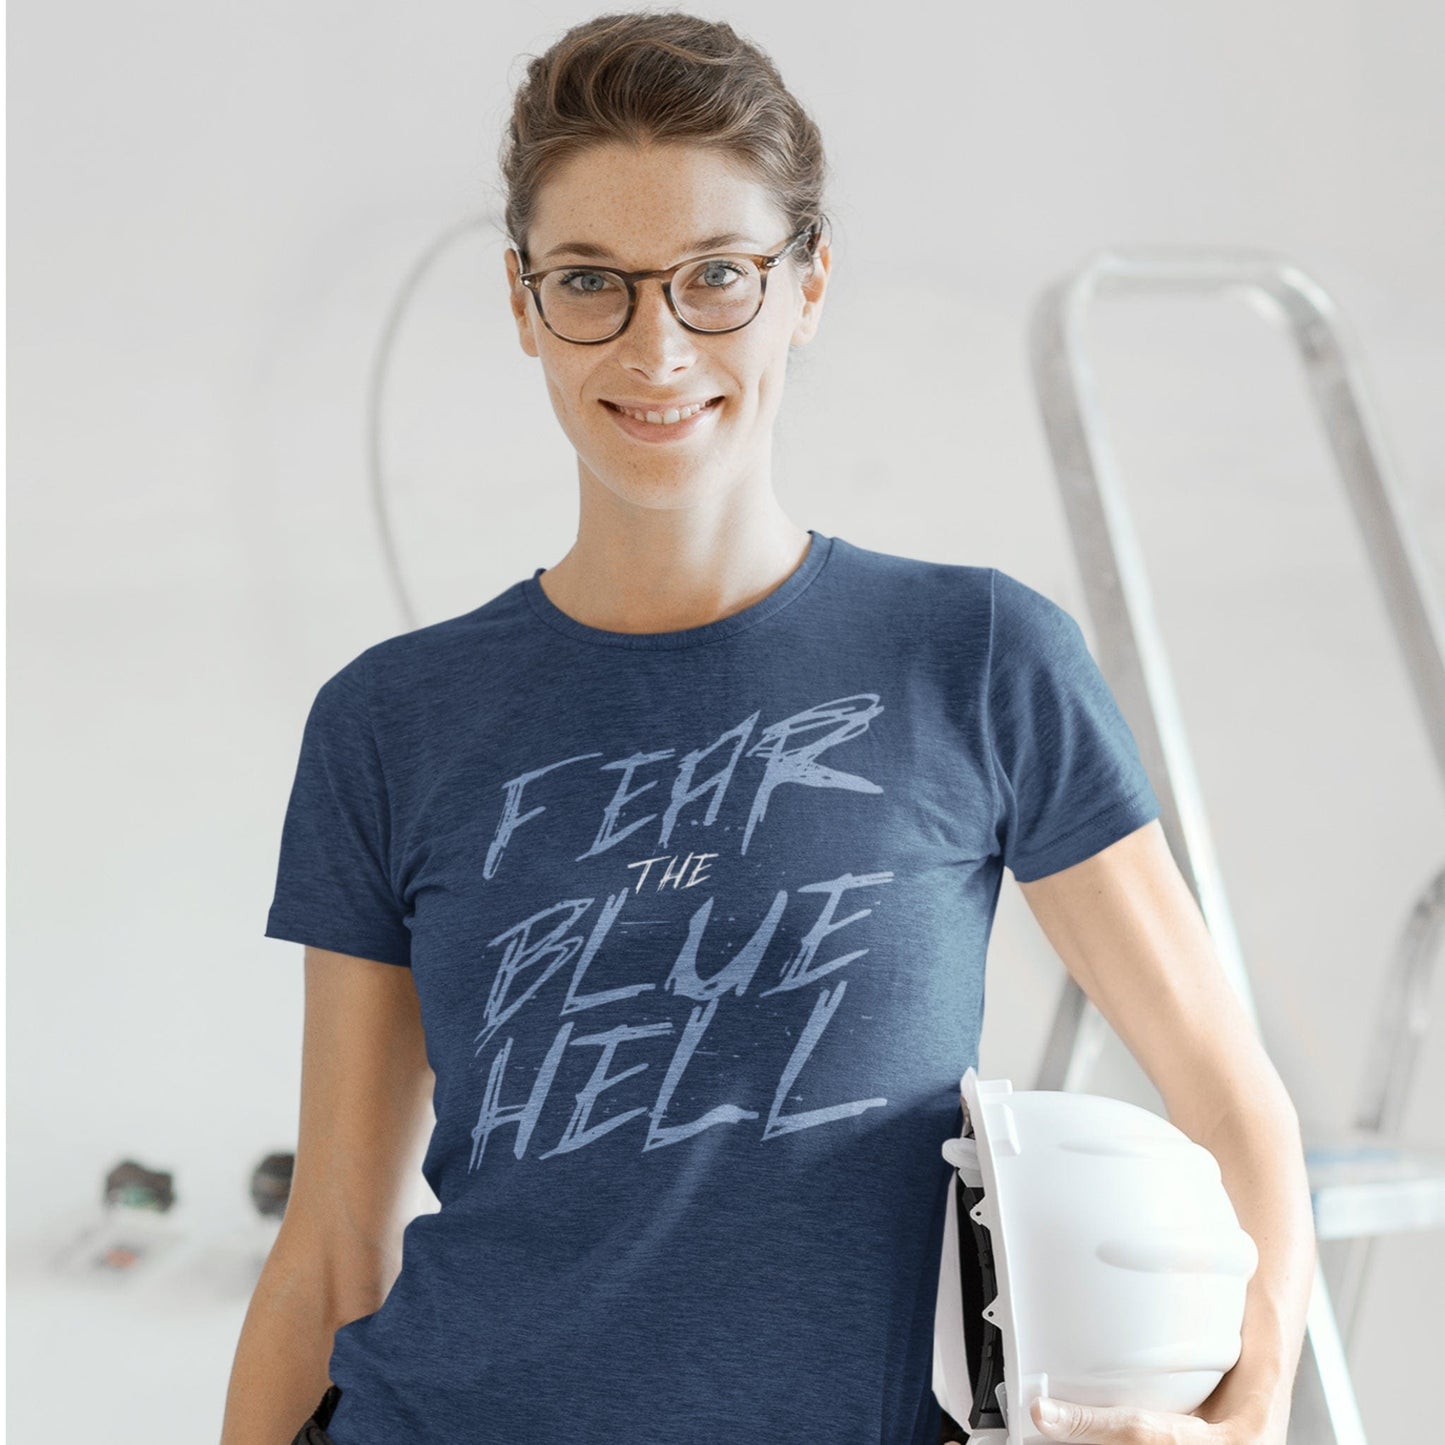 KC Swag Sporting Kansas City light blue white FEAR THE BLUE HELL on heather navy t-shirt worn by female model holding hard-hat in construction setting